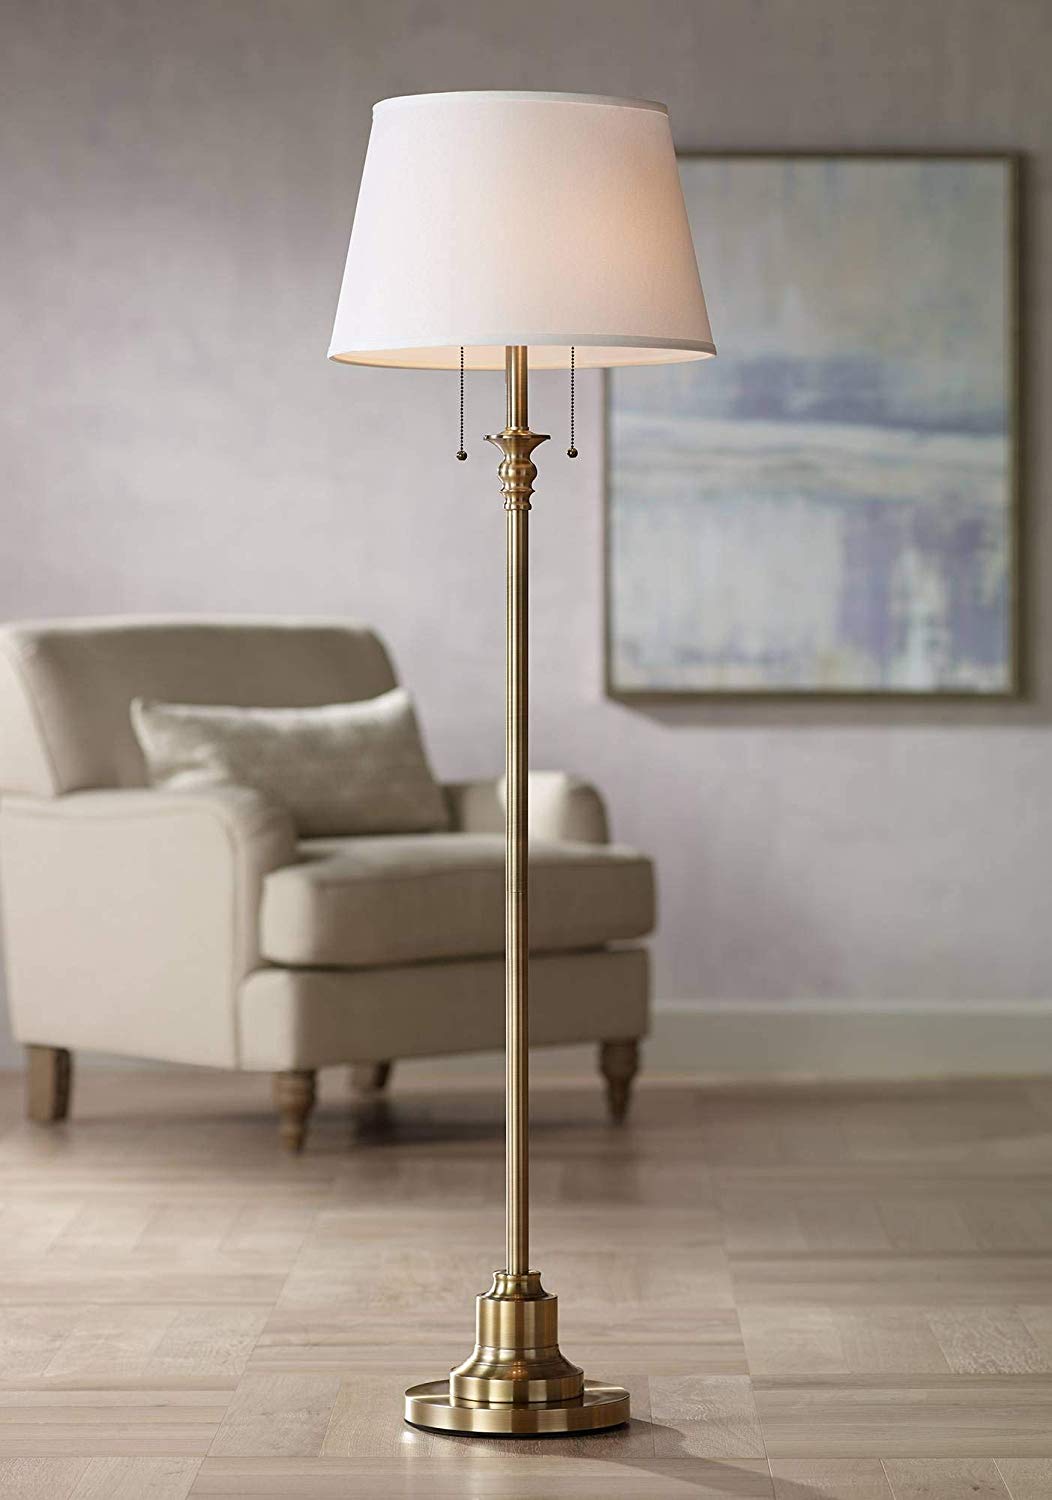 Spenser Traditional Floor Lamp Brushed Antique Brass Metal Off White Linen Fabric Drum Shade